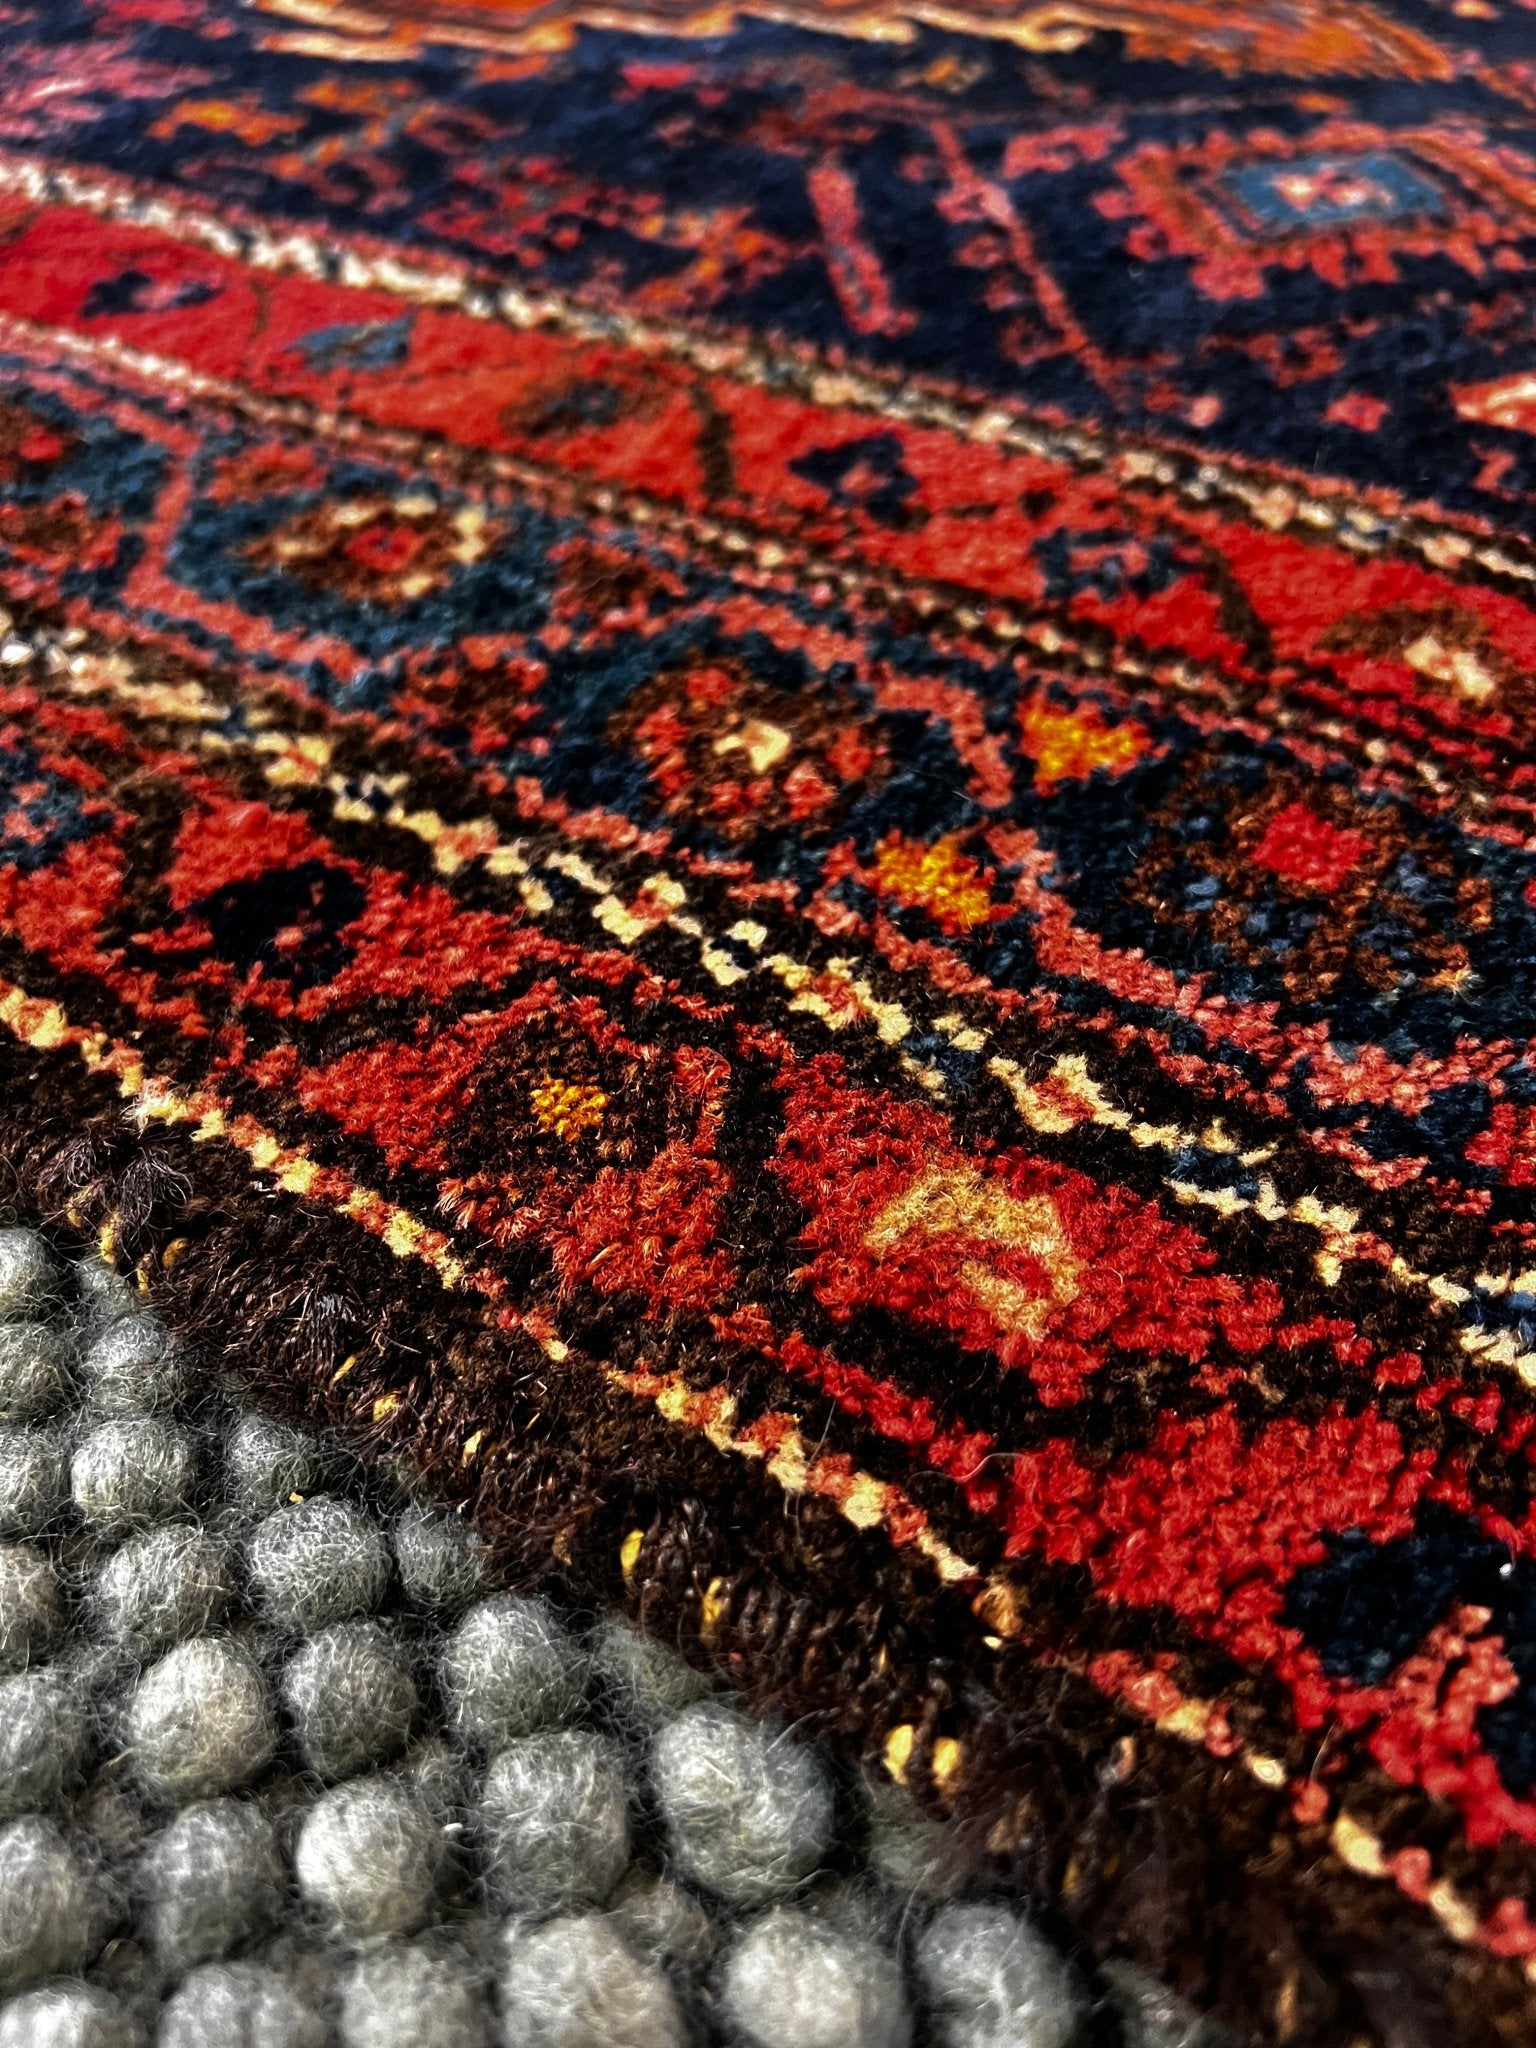 Fine Antique Persian Folk Life 3.11x6.7 Red & Blue | Banana Manor Rug Factory Outlet